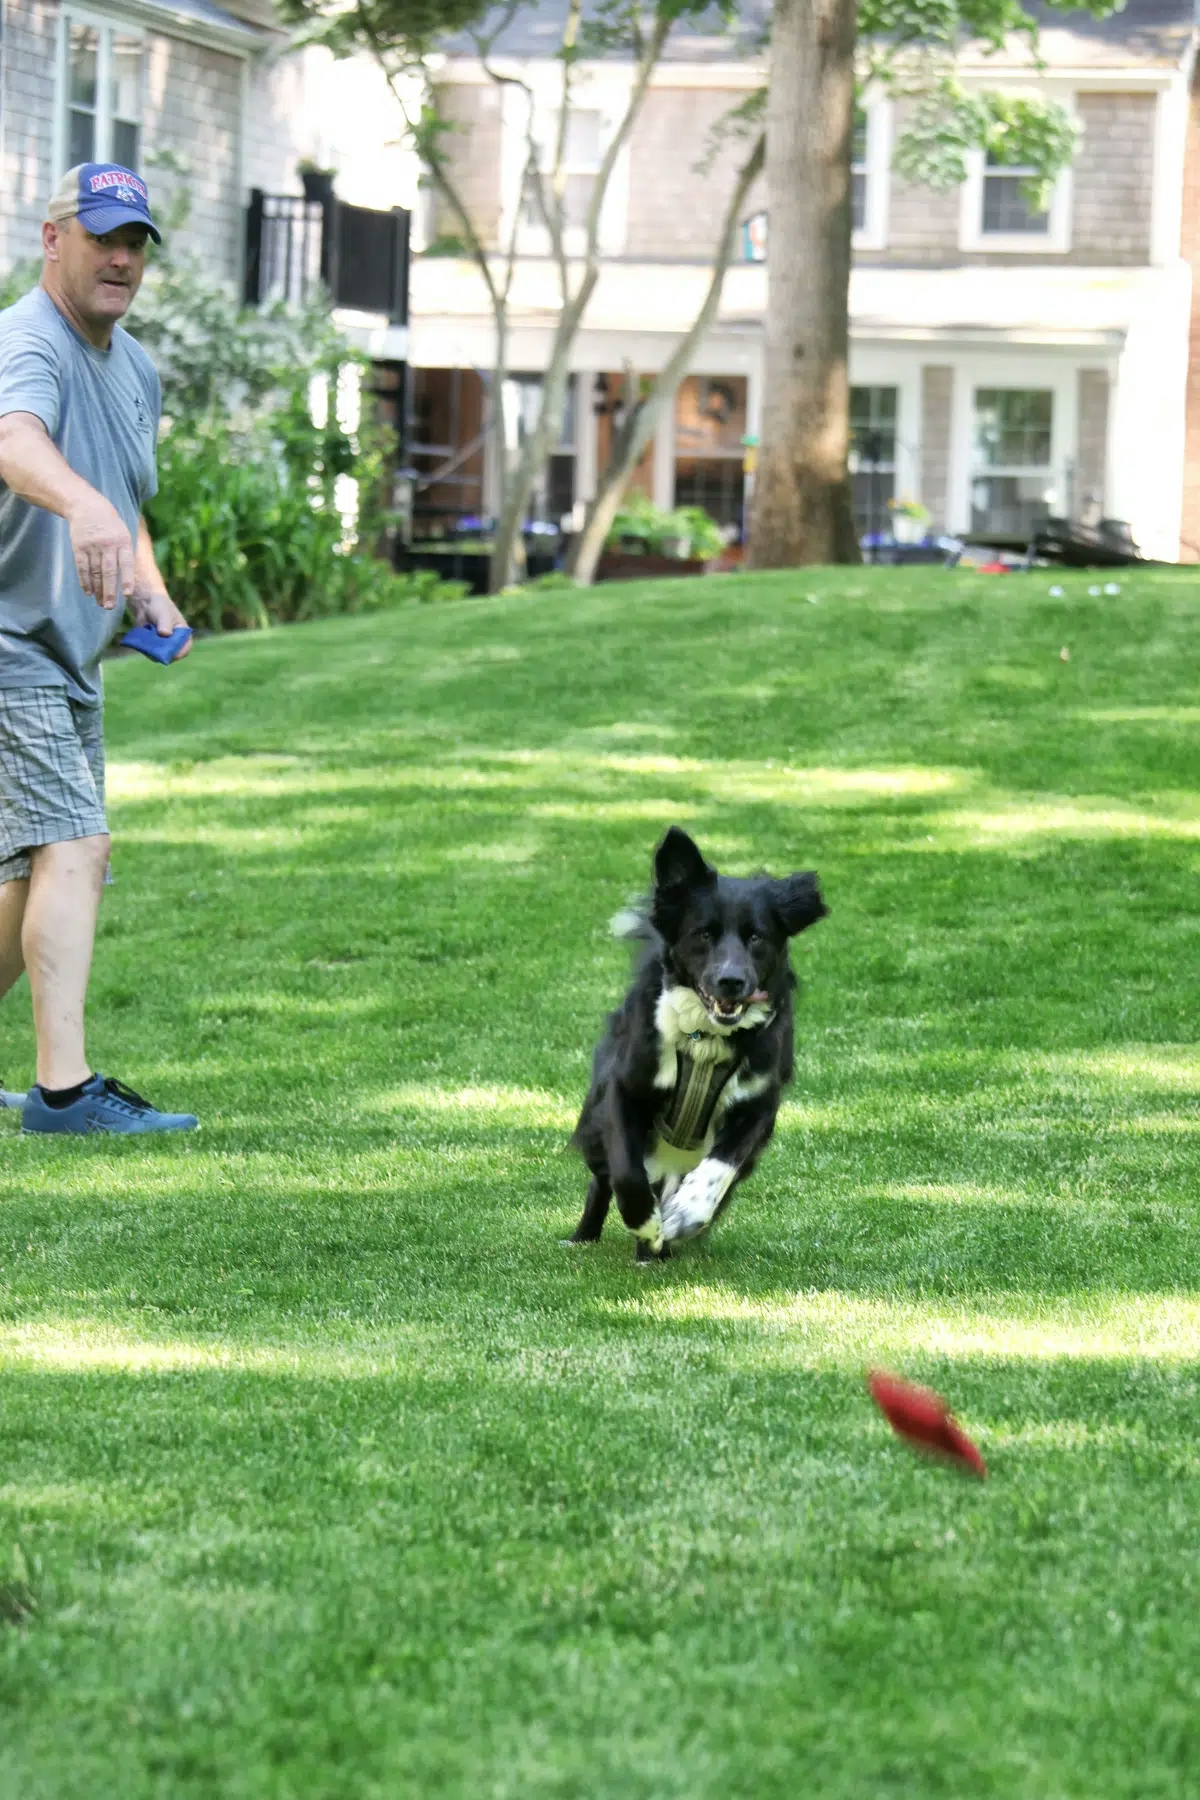 Man tossing bean backs for black dog to chase in green grass yard